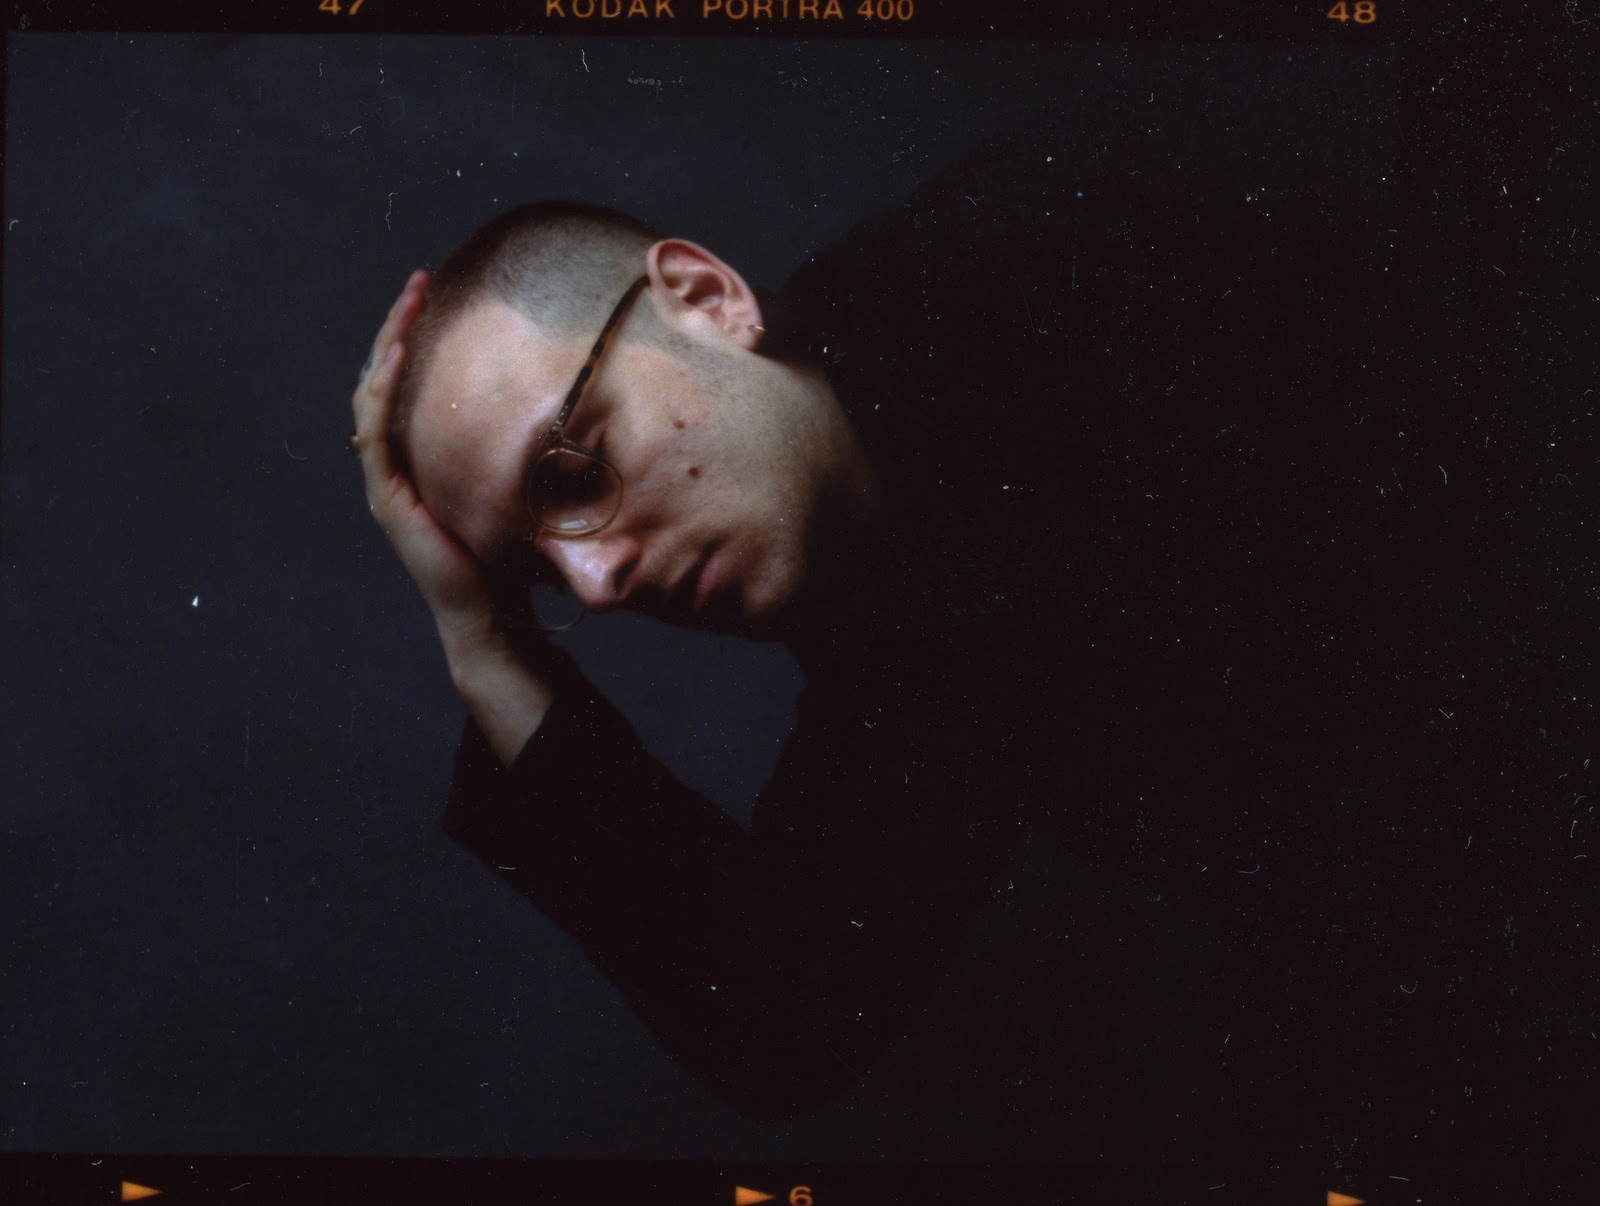 "Envelopes (Chapter VI)" by Leon Vynehall is Northern Transmissions' 'Song of the Day'